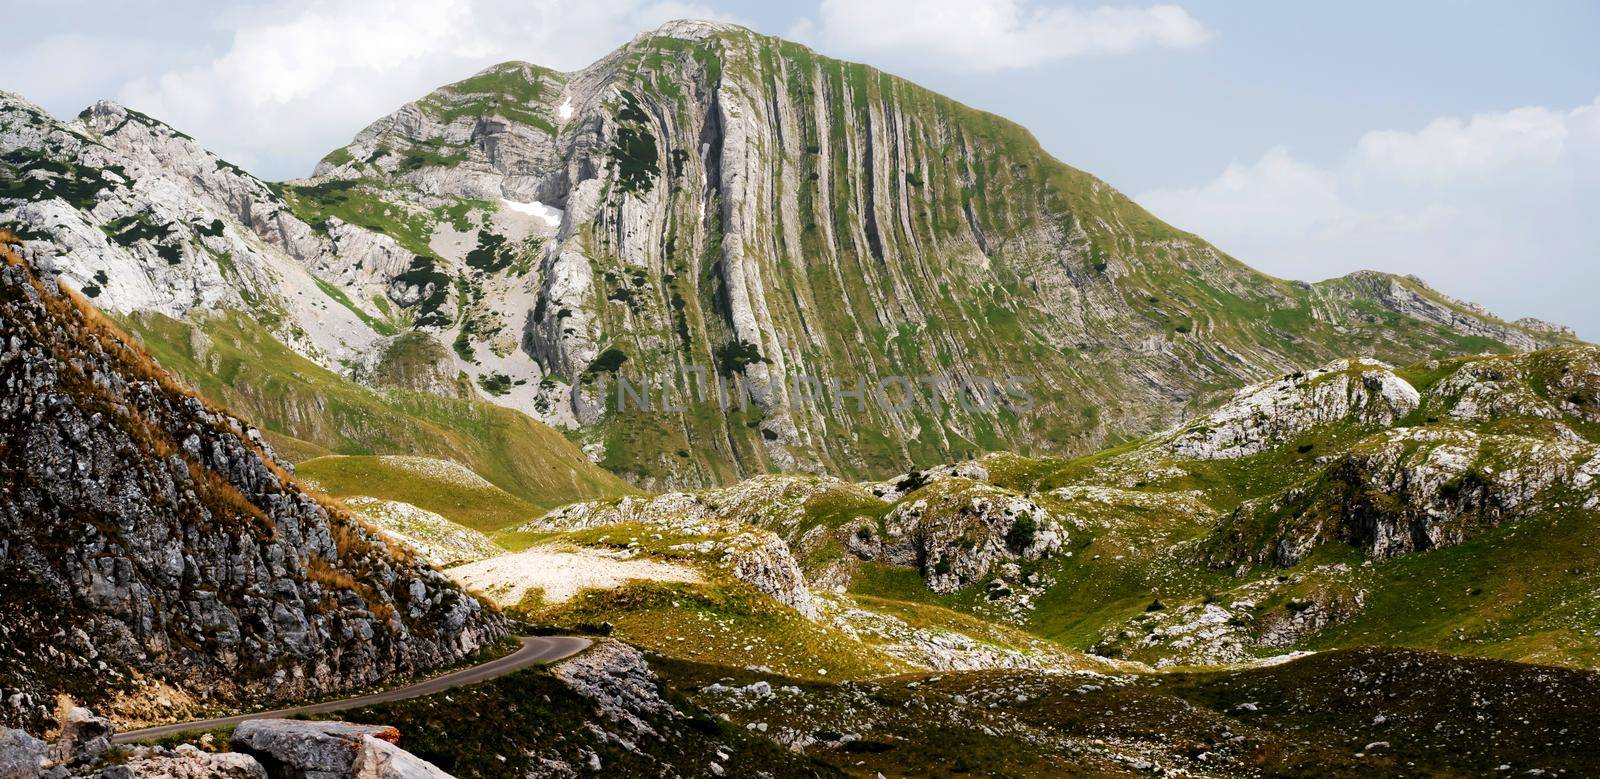 Scenic mountains view with serpentine road in National park Durmitor, Montenegro. Amazing balkan nature panorama